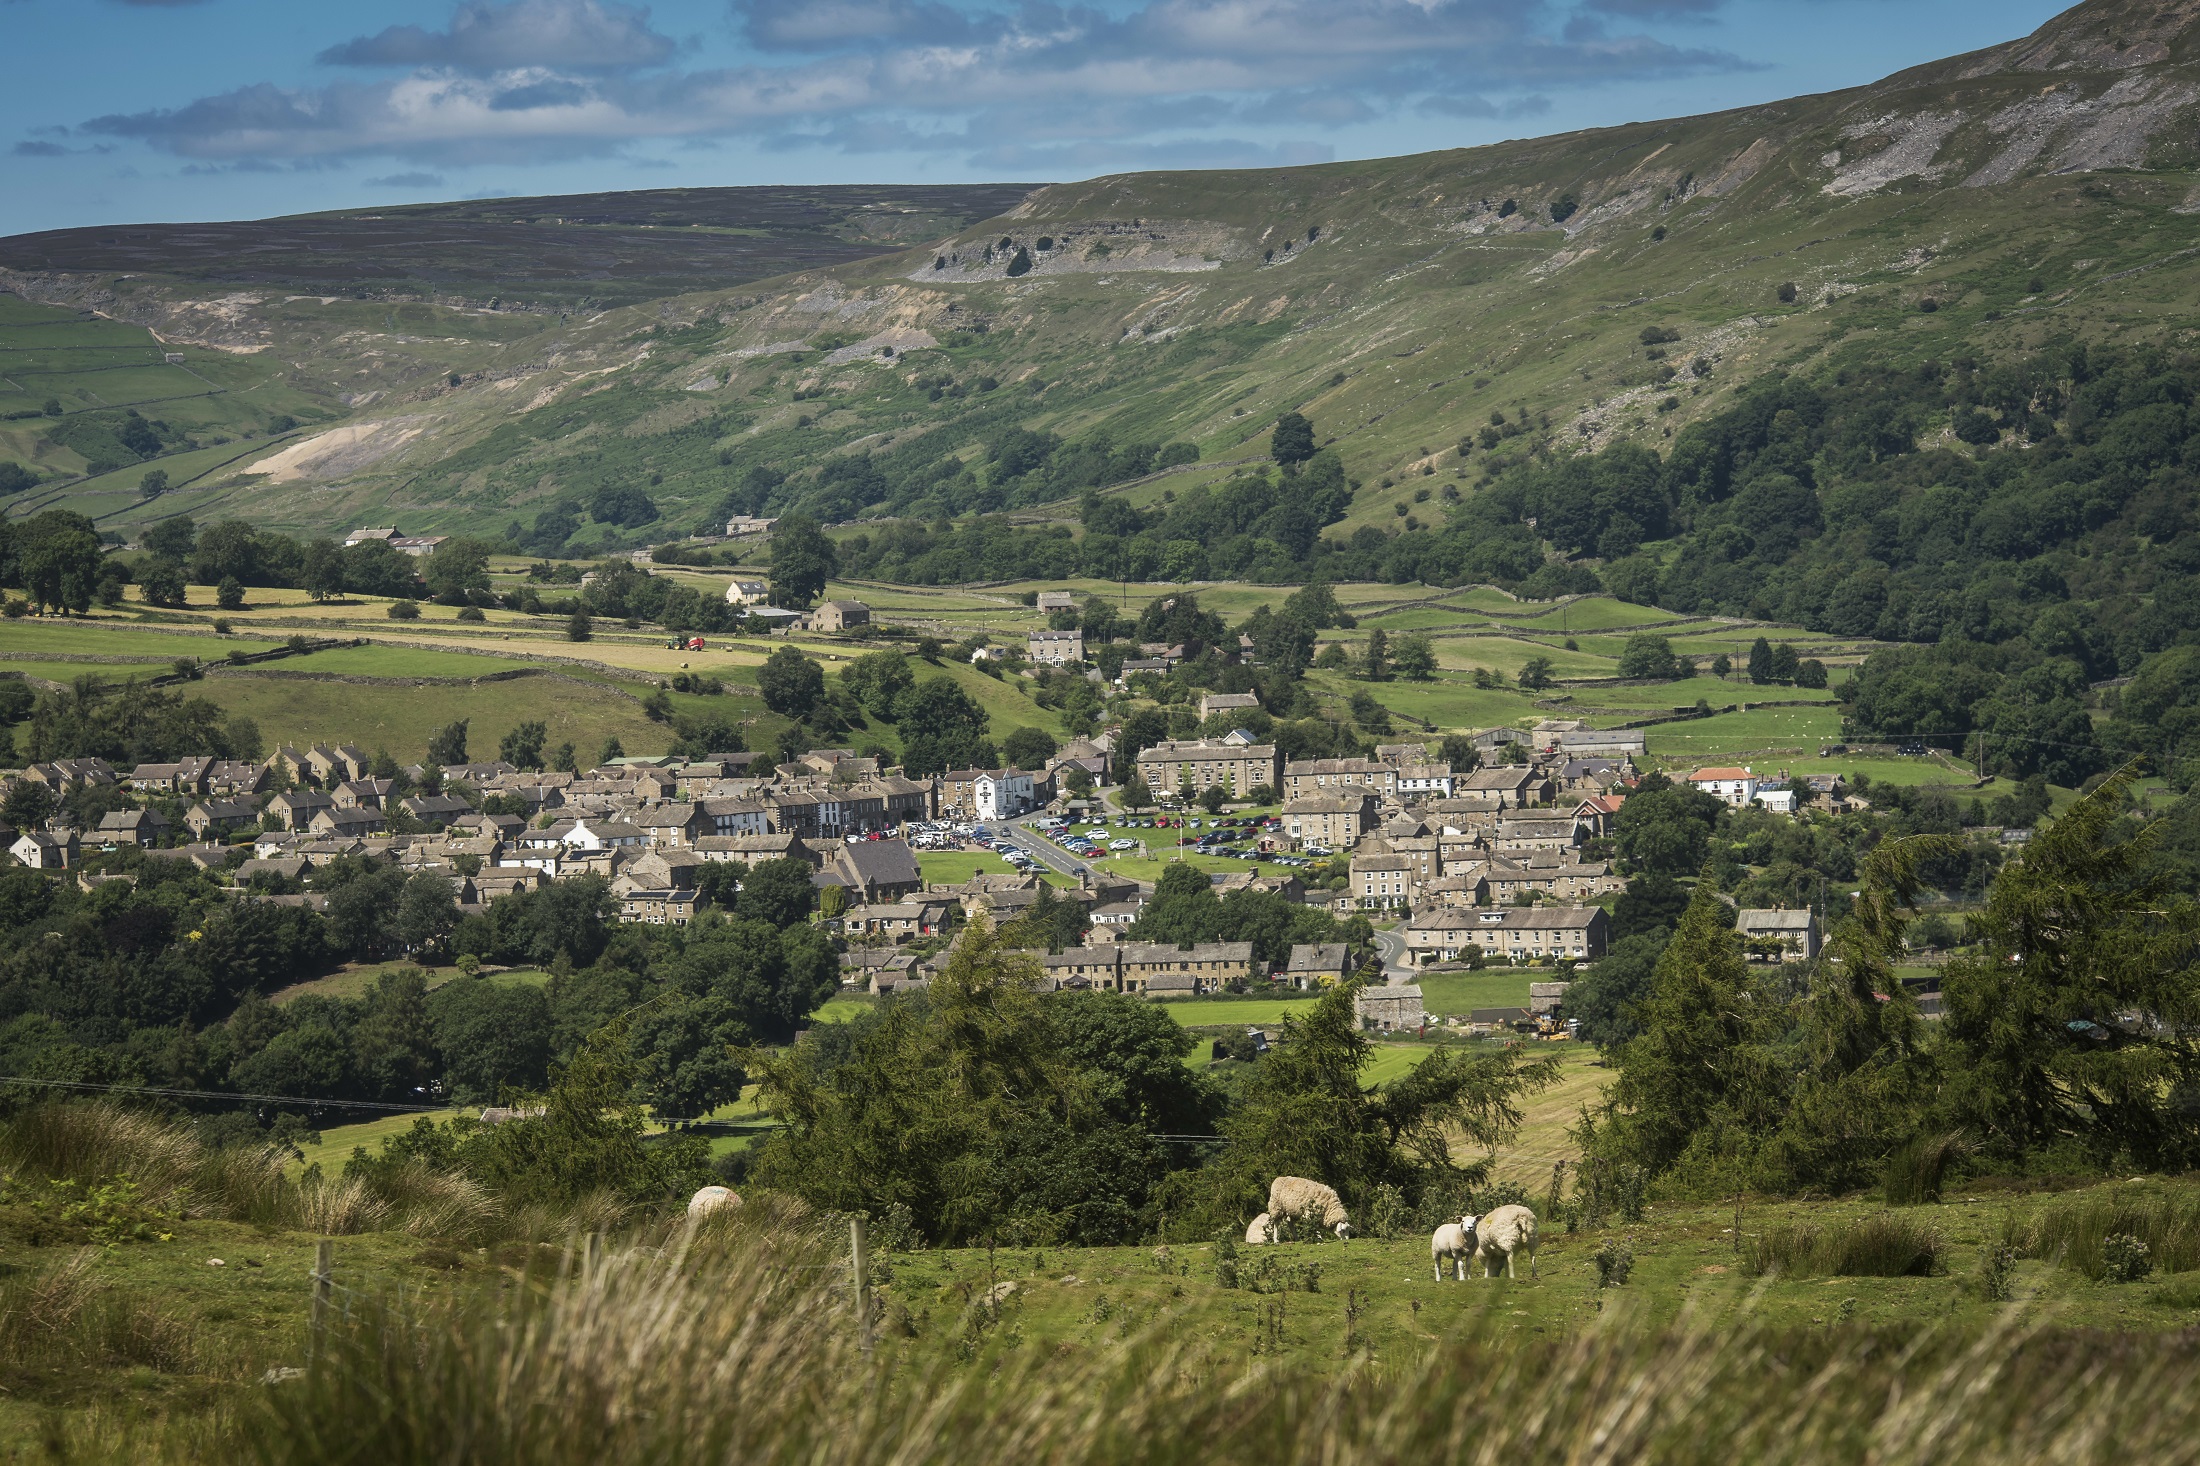 A general view of Reeth